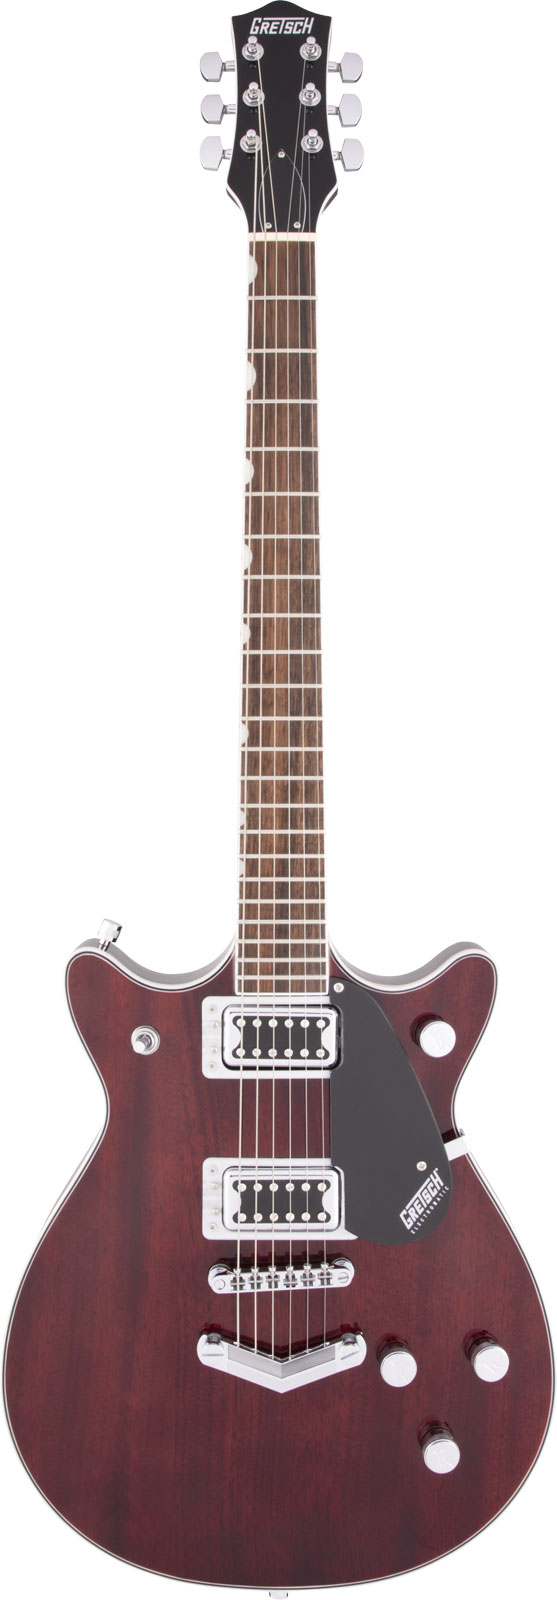 GRETSCH GUITARS G5222 ELECTROMATIC DOUBLE JET BT WITH V-STOPTAIL LRL, WALNUT STAIN